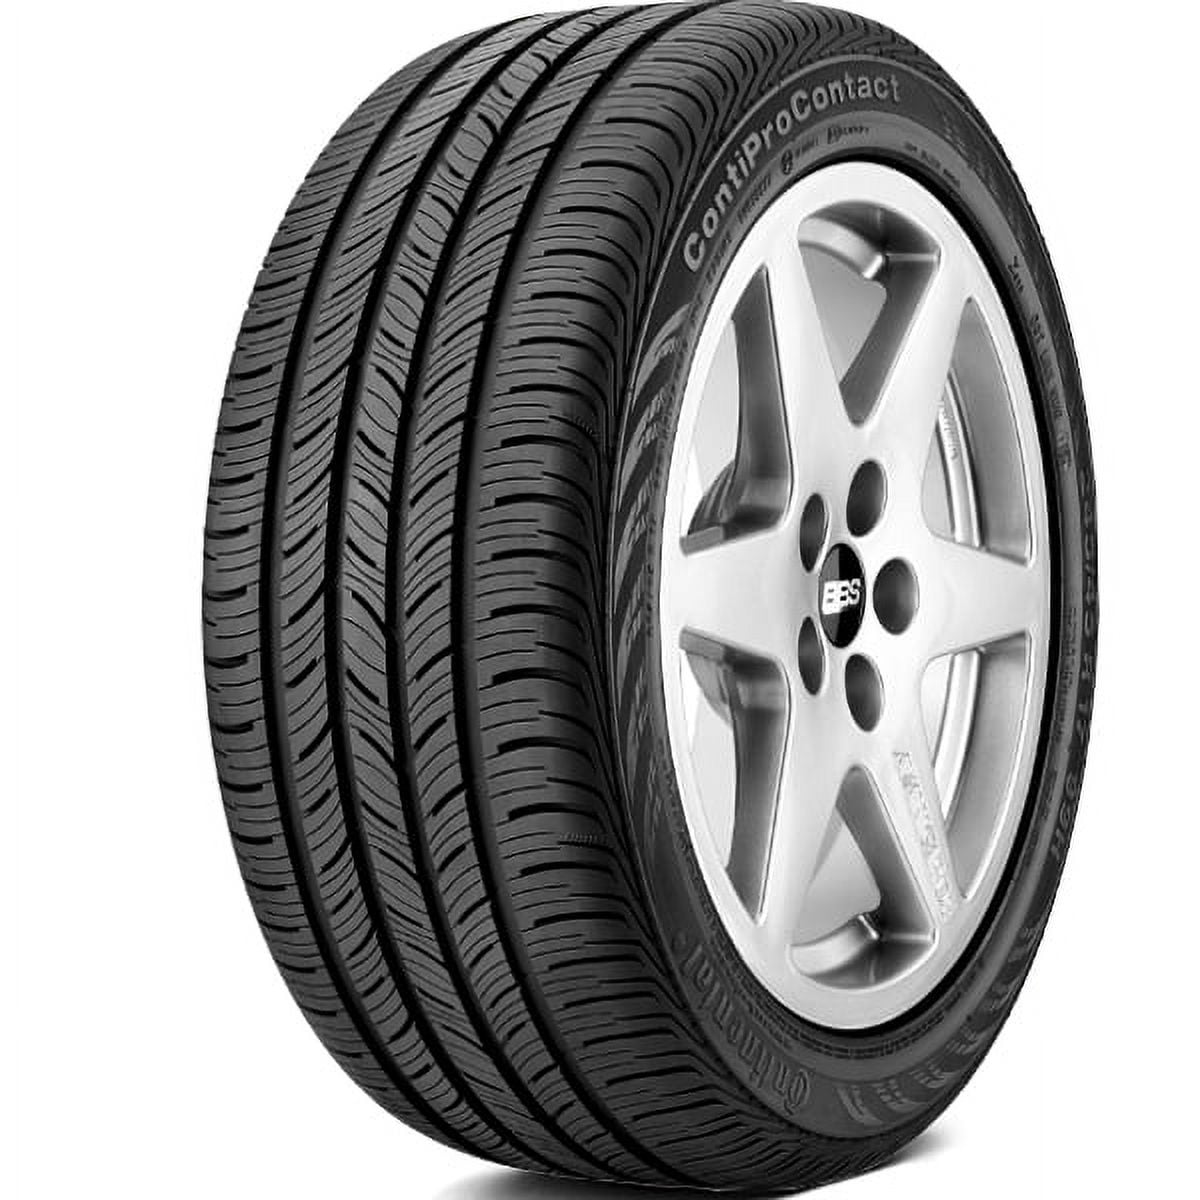 Season Continental ContiProContact 205/50R17 BSW 89V All Tire